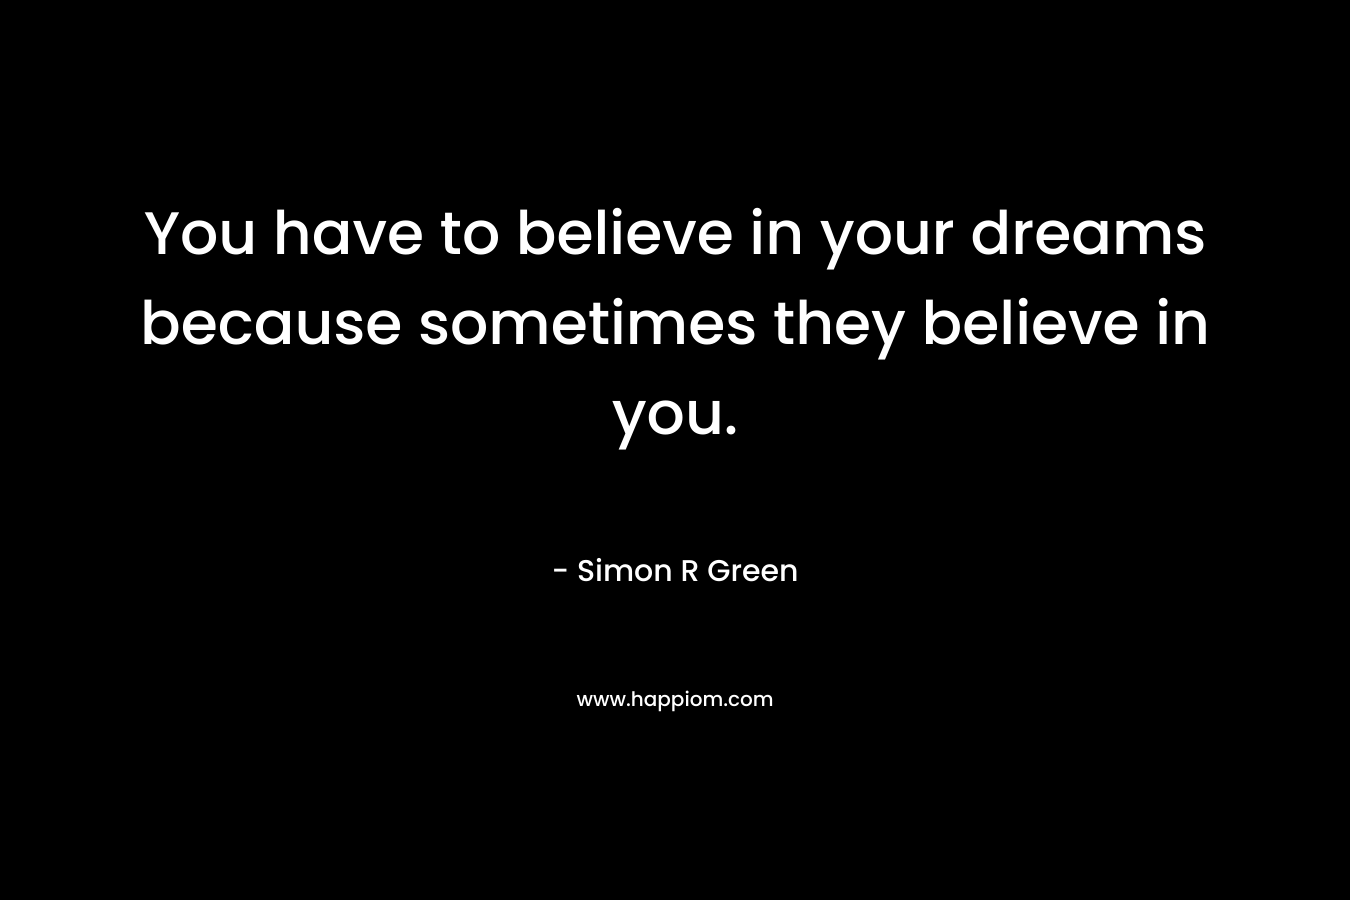 You have to believe in your dreams because sometimes they believe in you.